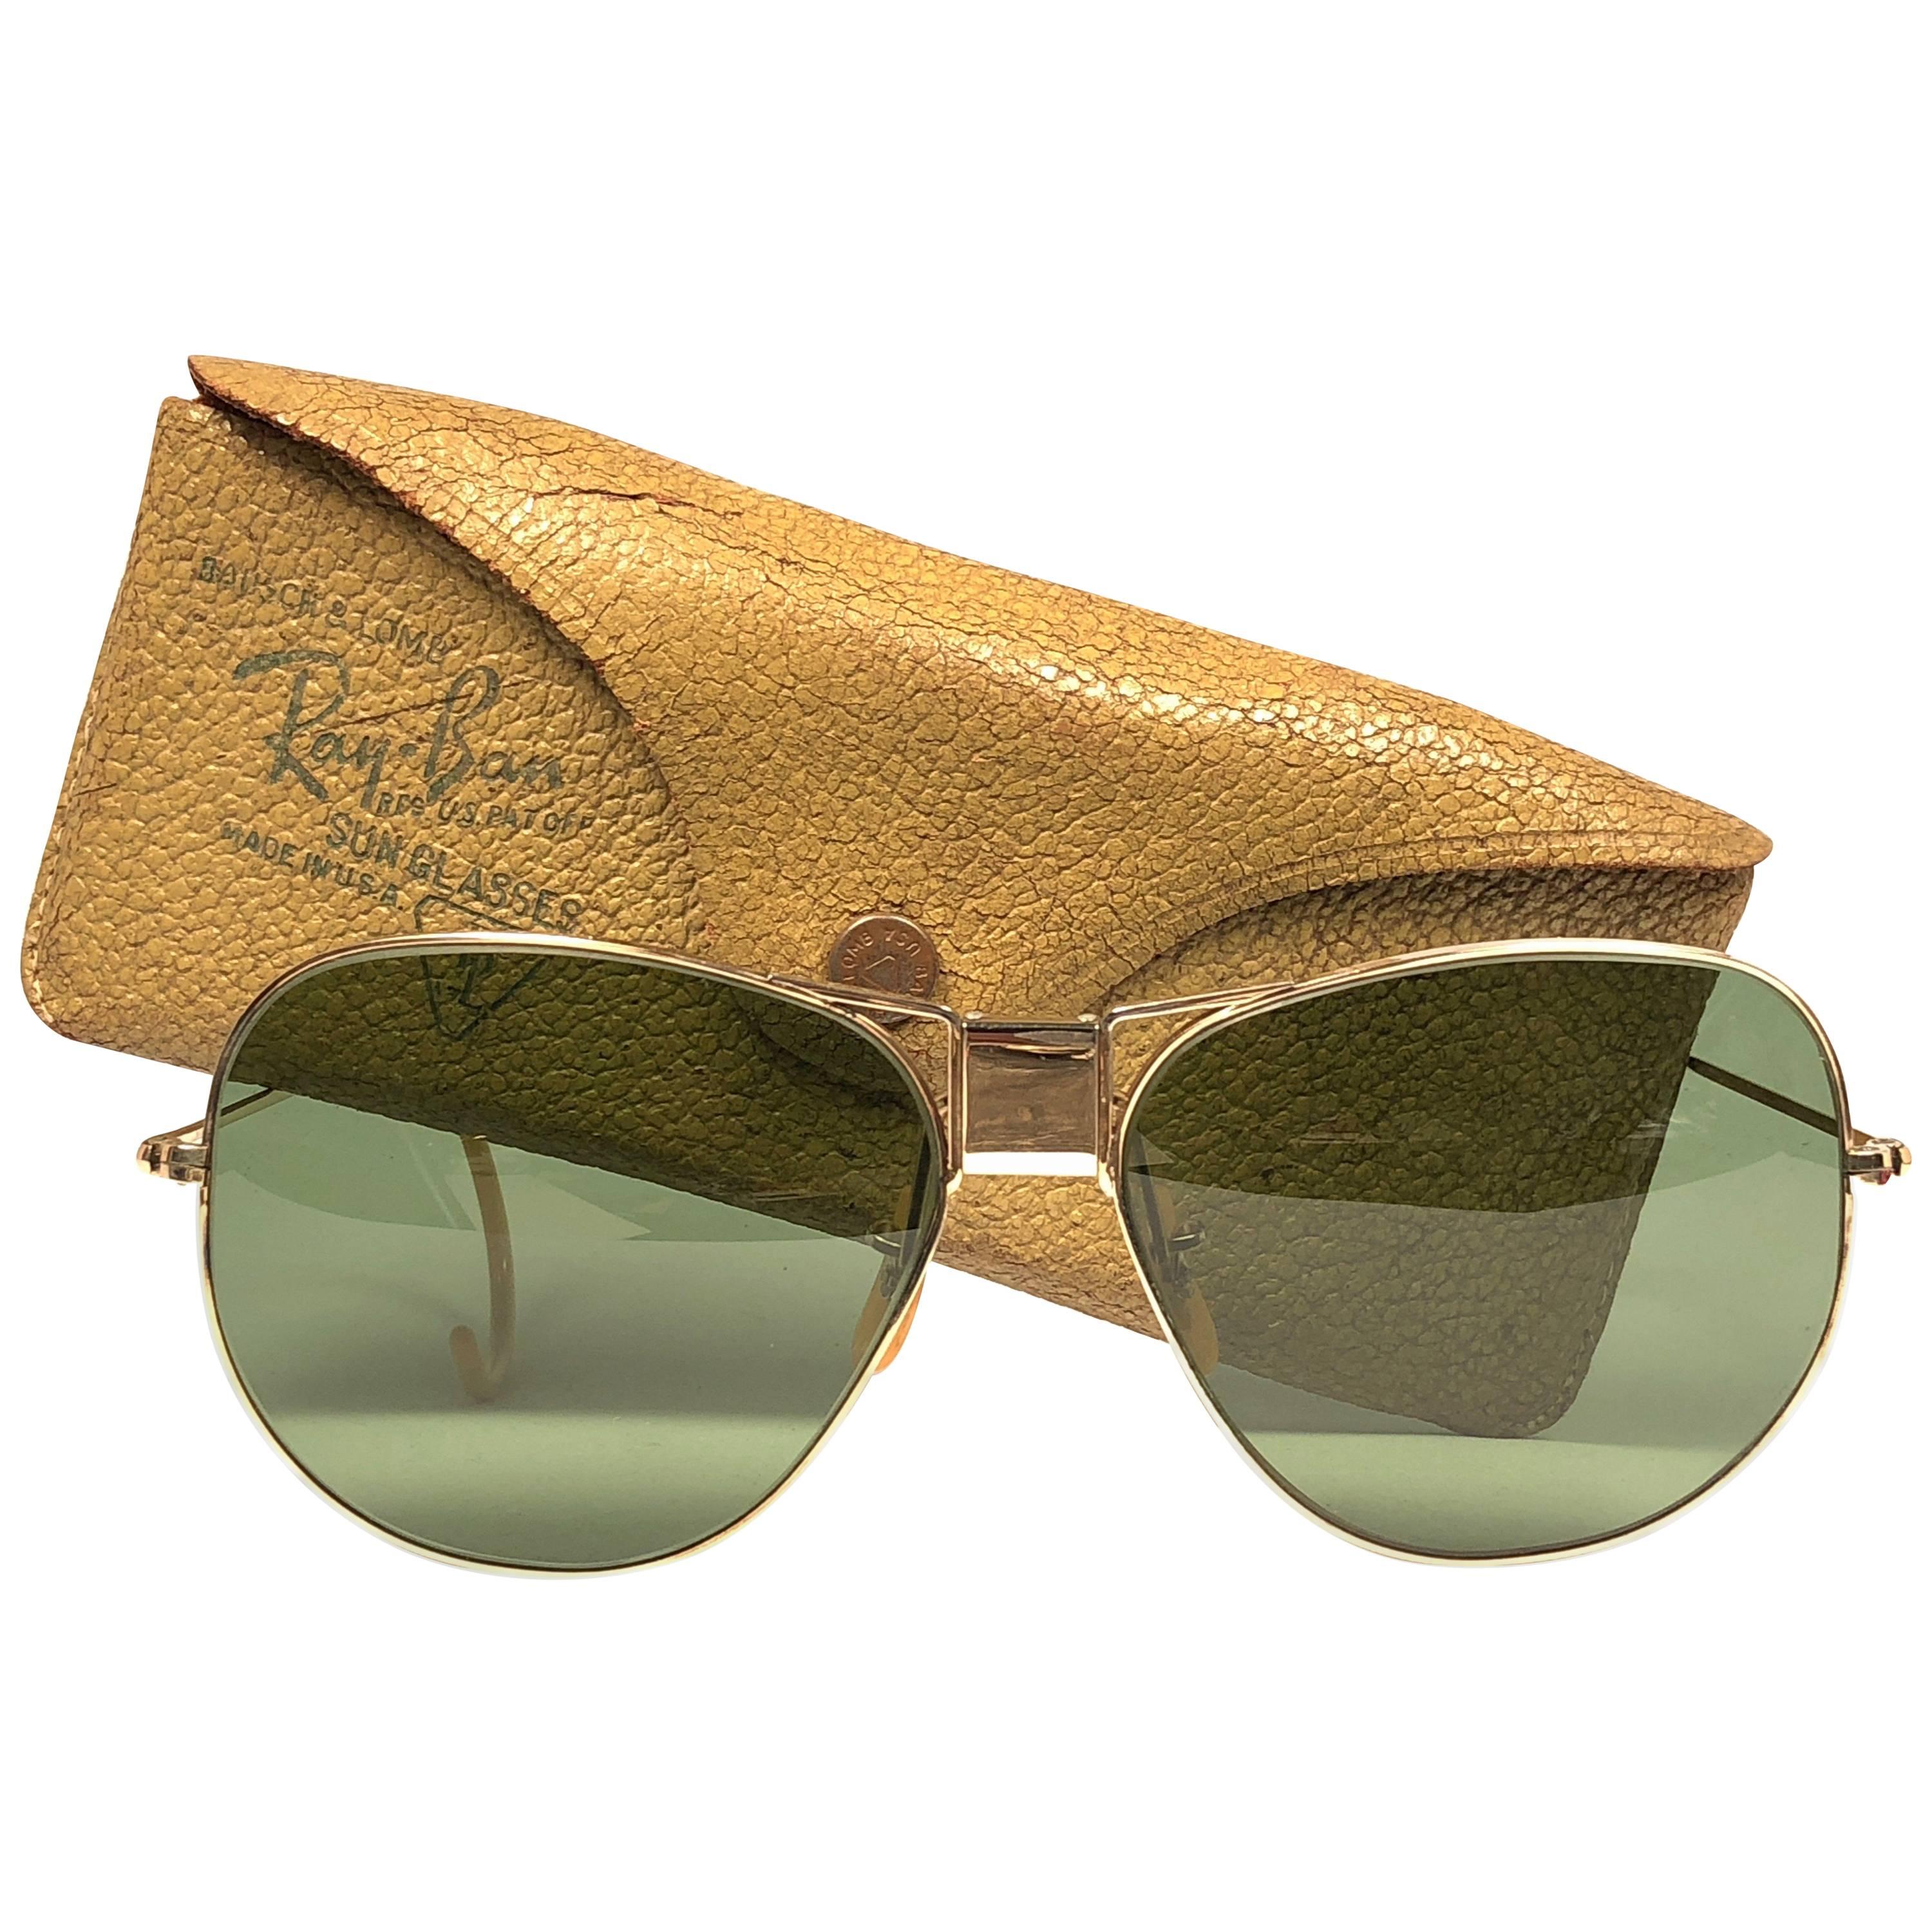 RAY BAN B&L BAUSCH & LOMB GOLD 10K AVIATOR '50 IMPACT RESISTANT LENSES VERY RARE 